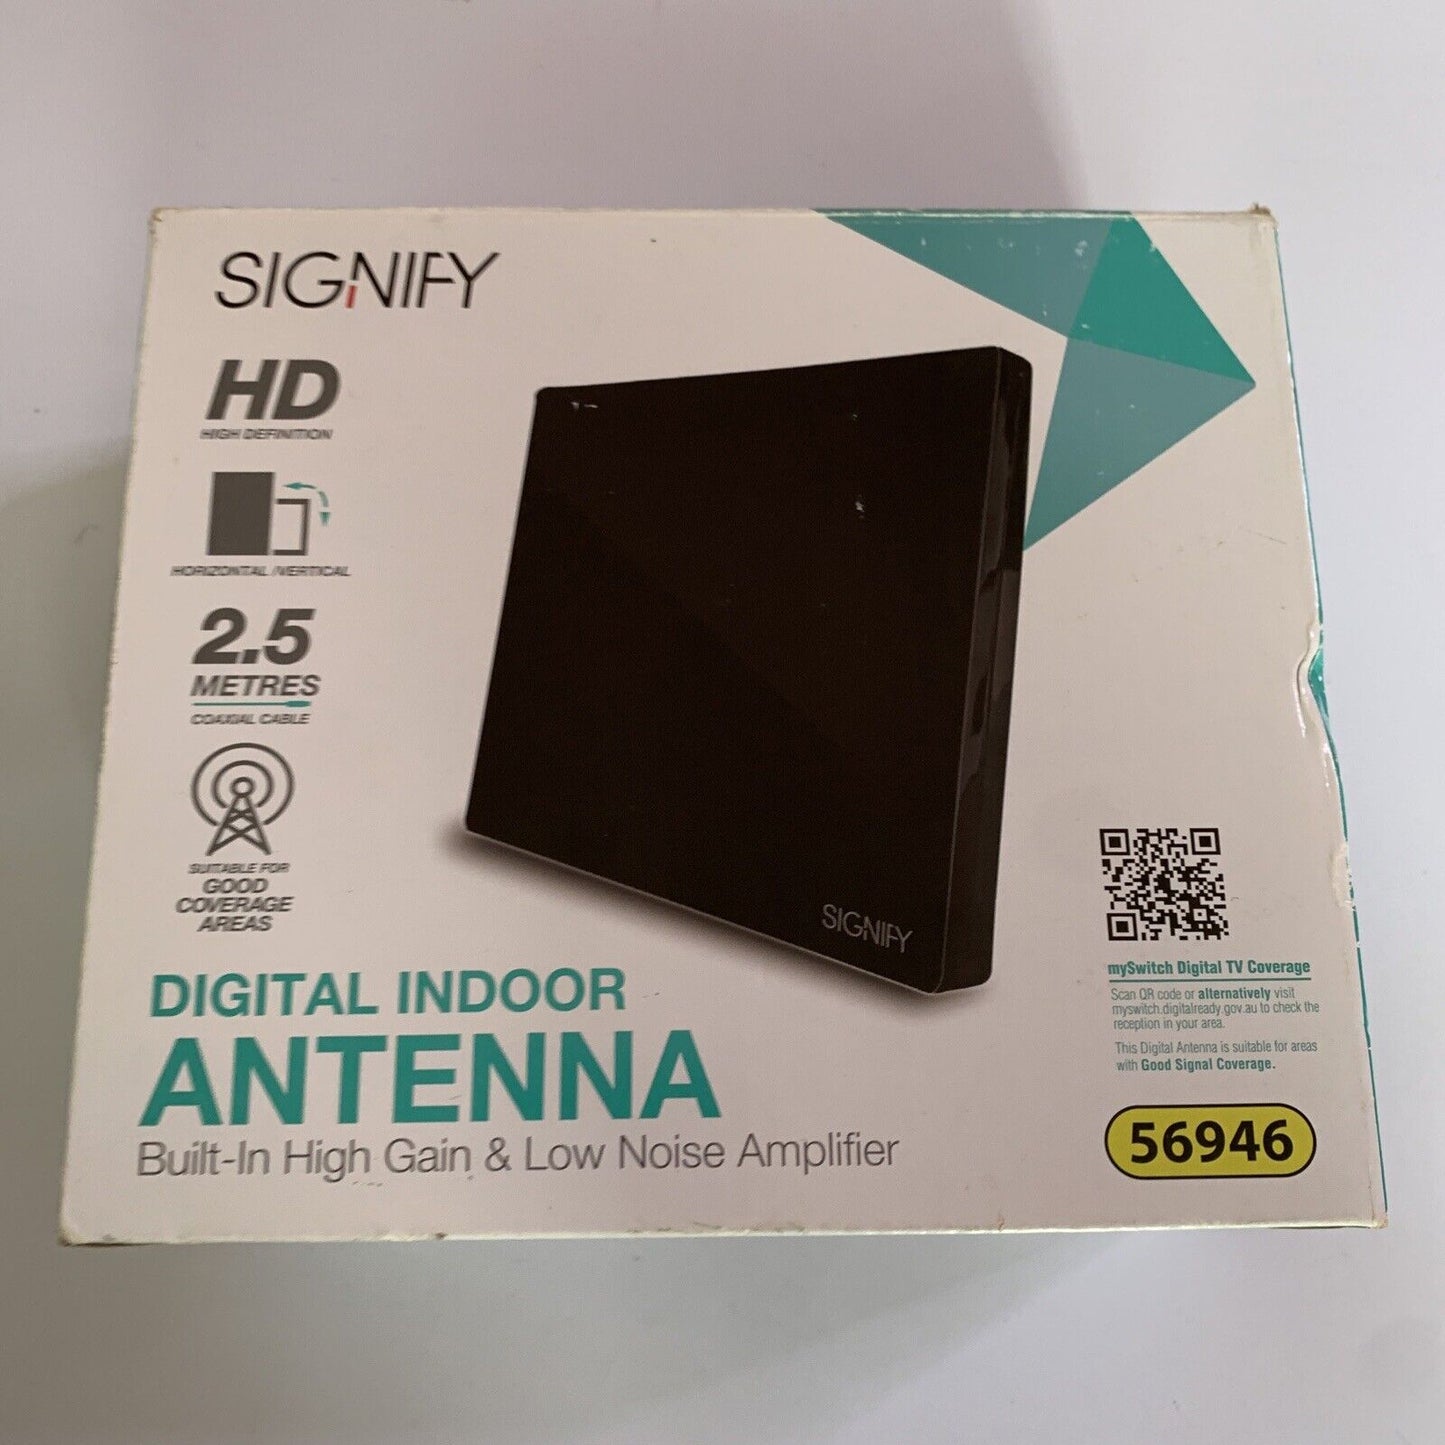 Signify Digital Indoor Antenna Built-in High Gain & Low Noise Amplifier NEW